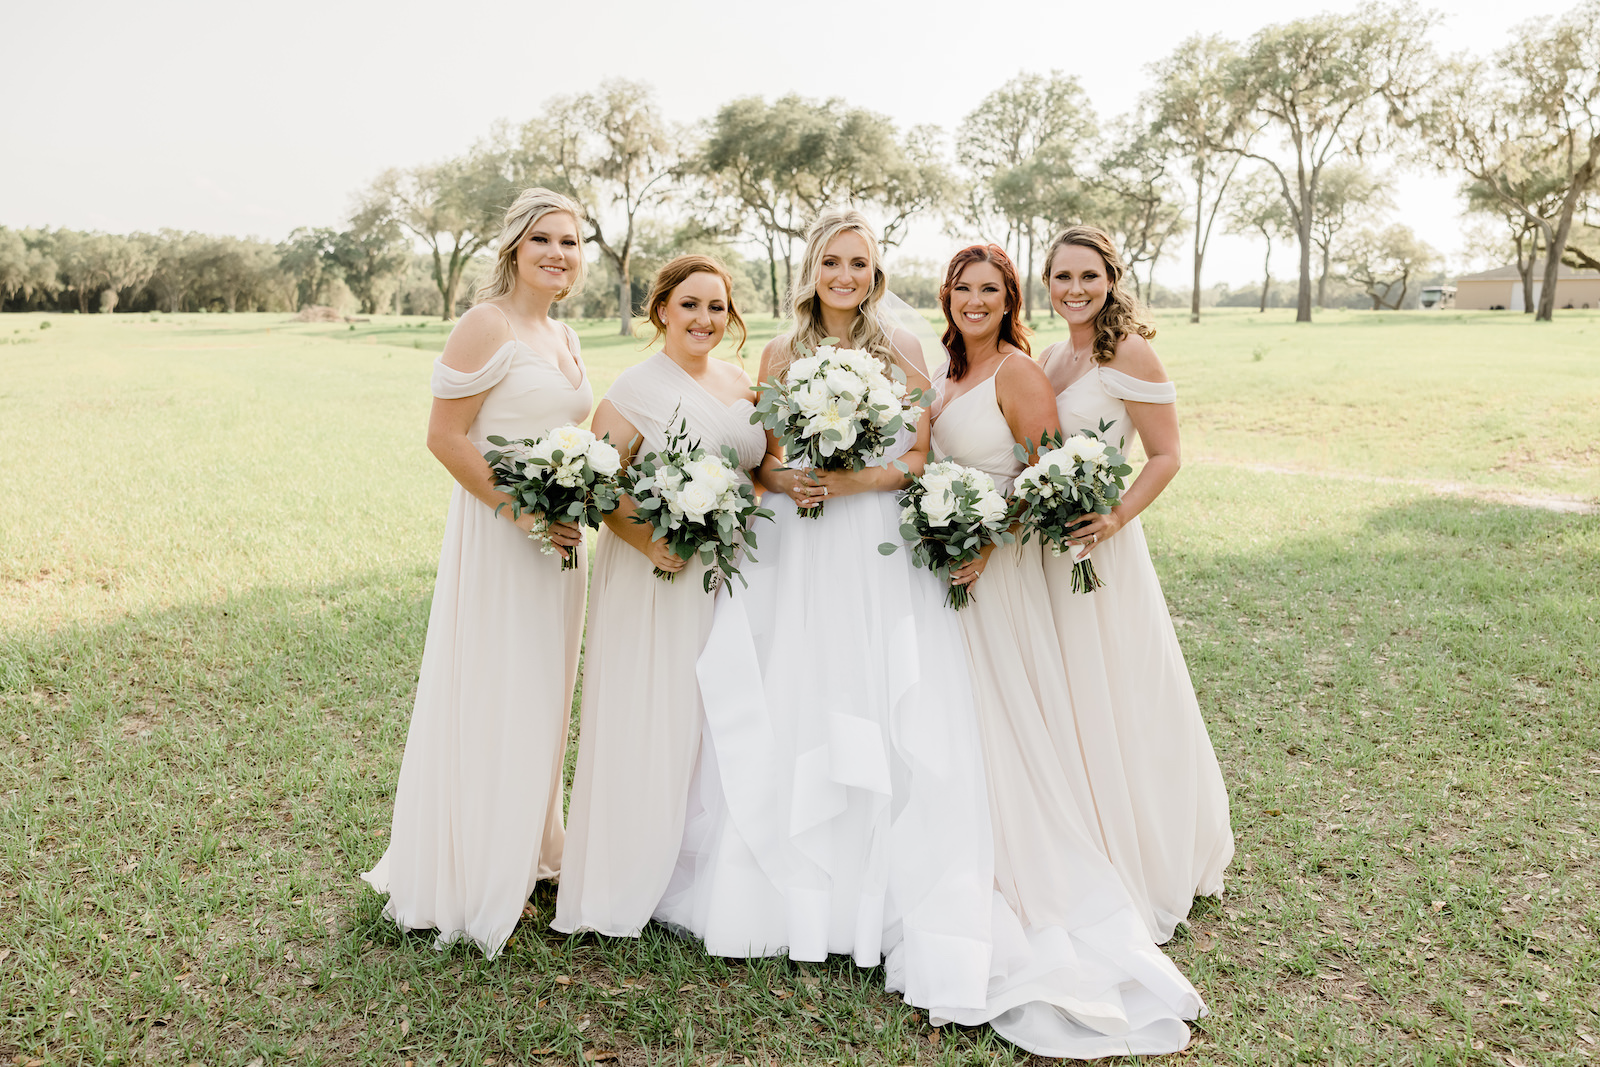 Tampa Bay and Bridesmaids Wearing Mix and Match Champagne/Ivory Dresses Holding Classic White and Greenery Floral Bouquets